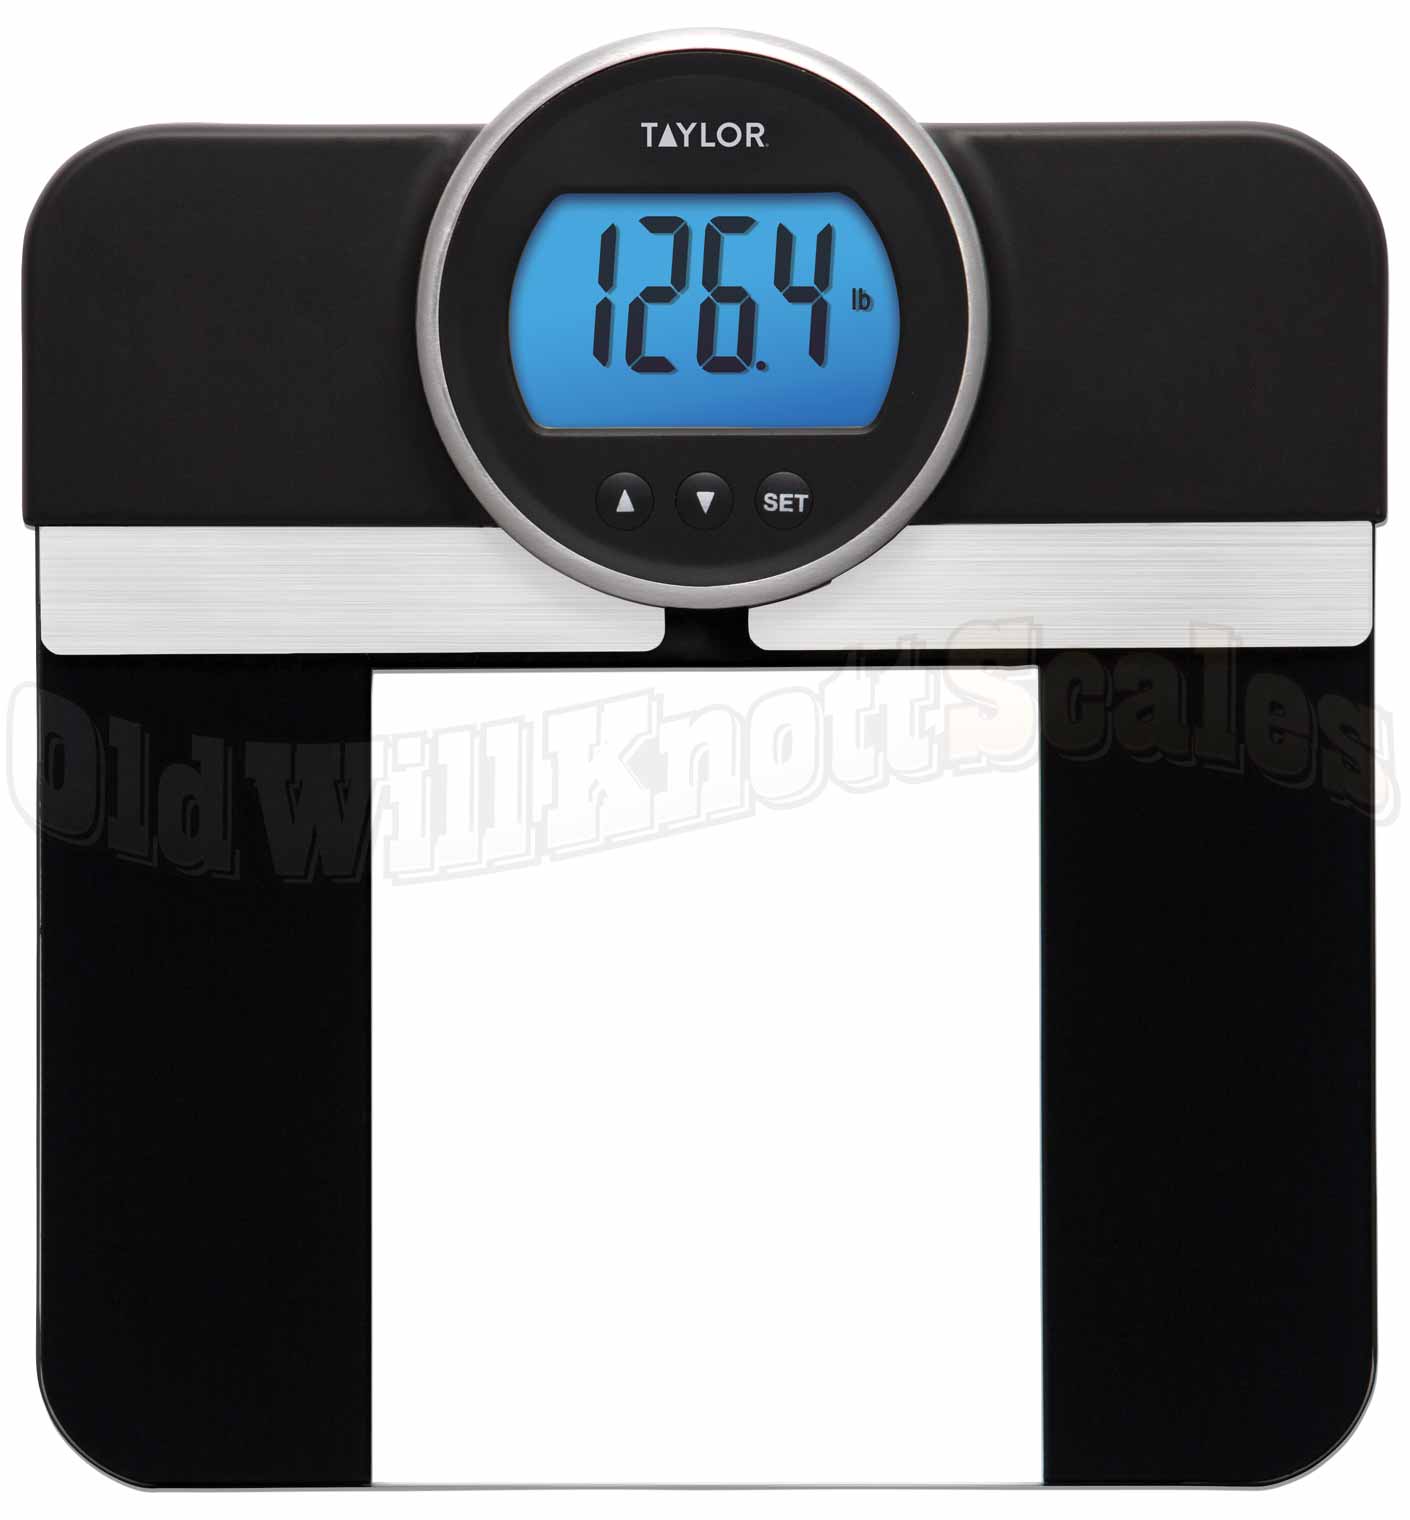 Taylor Electronic Glass Talking Bathroom Scale 440 Lb Capacity